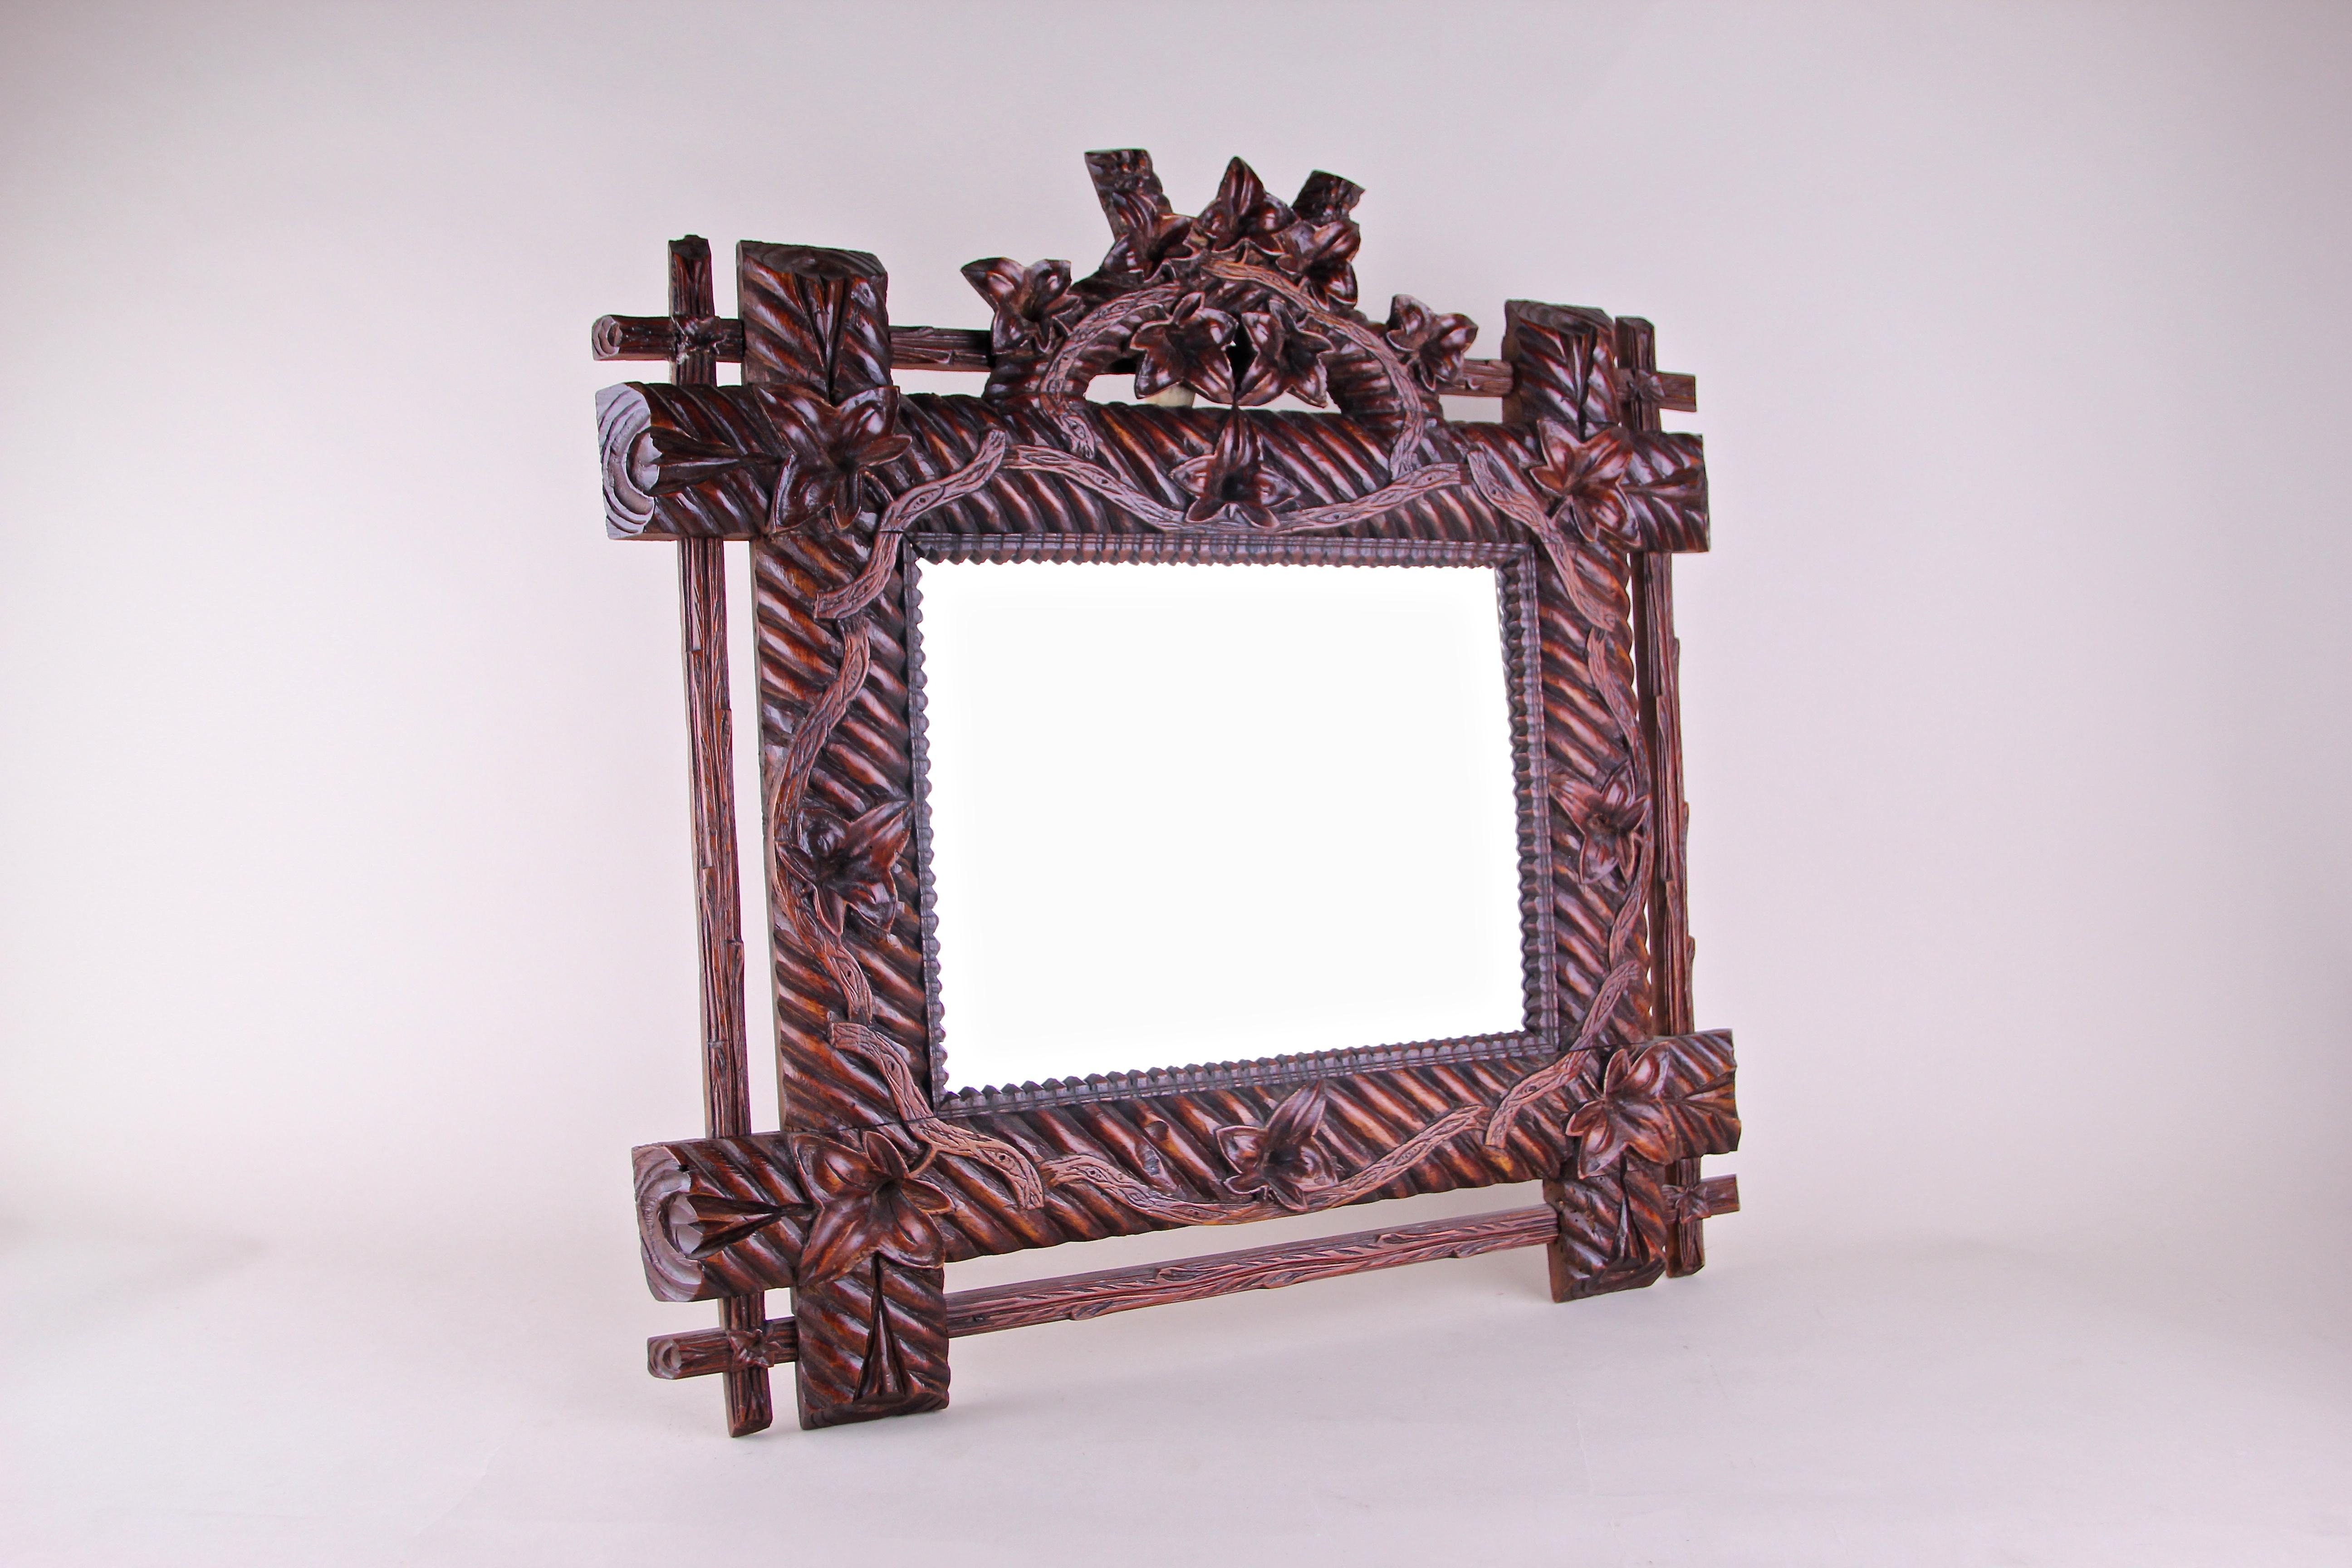 Exceptional Black Forest wall mirror out of Bavaria/ Germany from the late 19th century around 1880. An unusual designed rustic wall mirror with a wide dark brown glazed frame showing delicate hand-carved bellflowers and tendrils surrounded by four